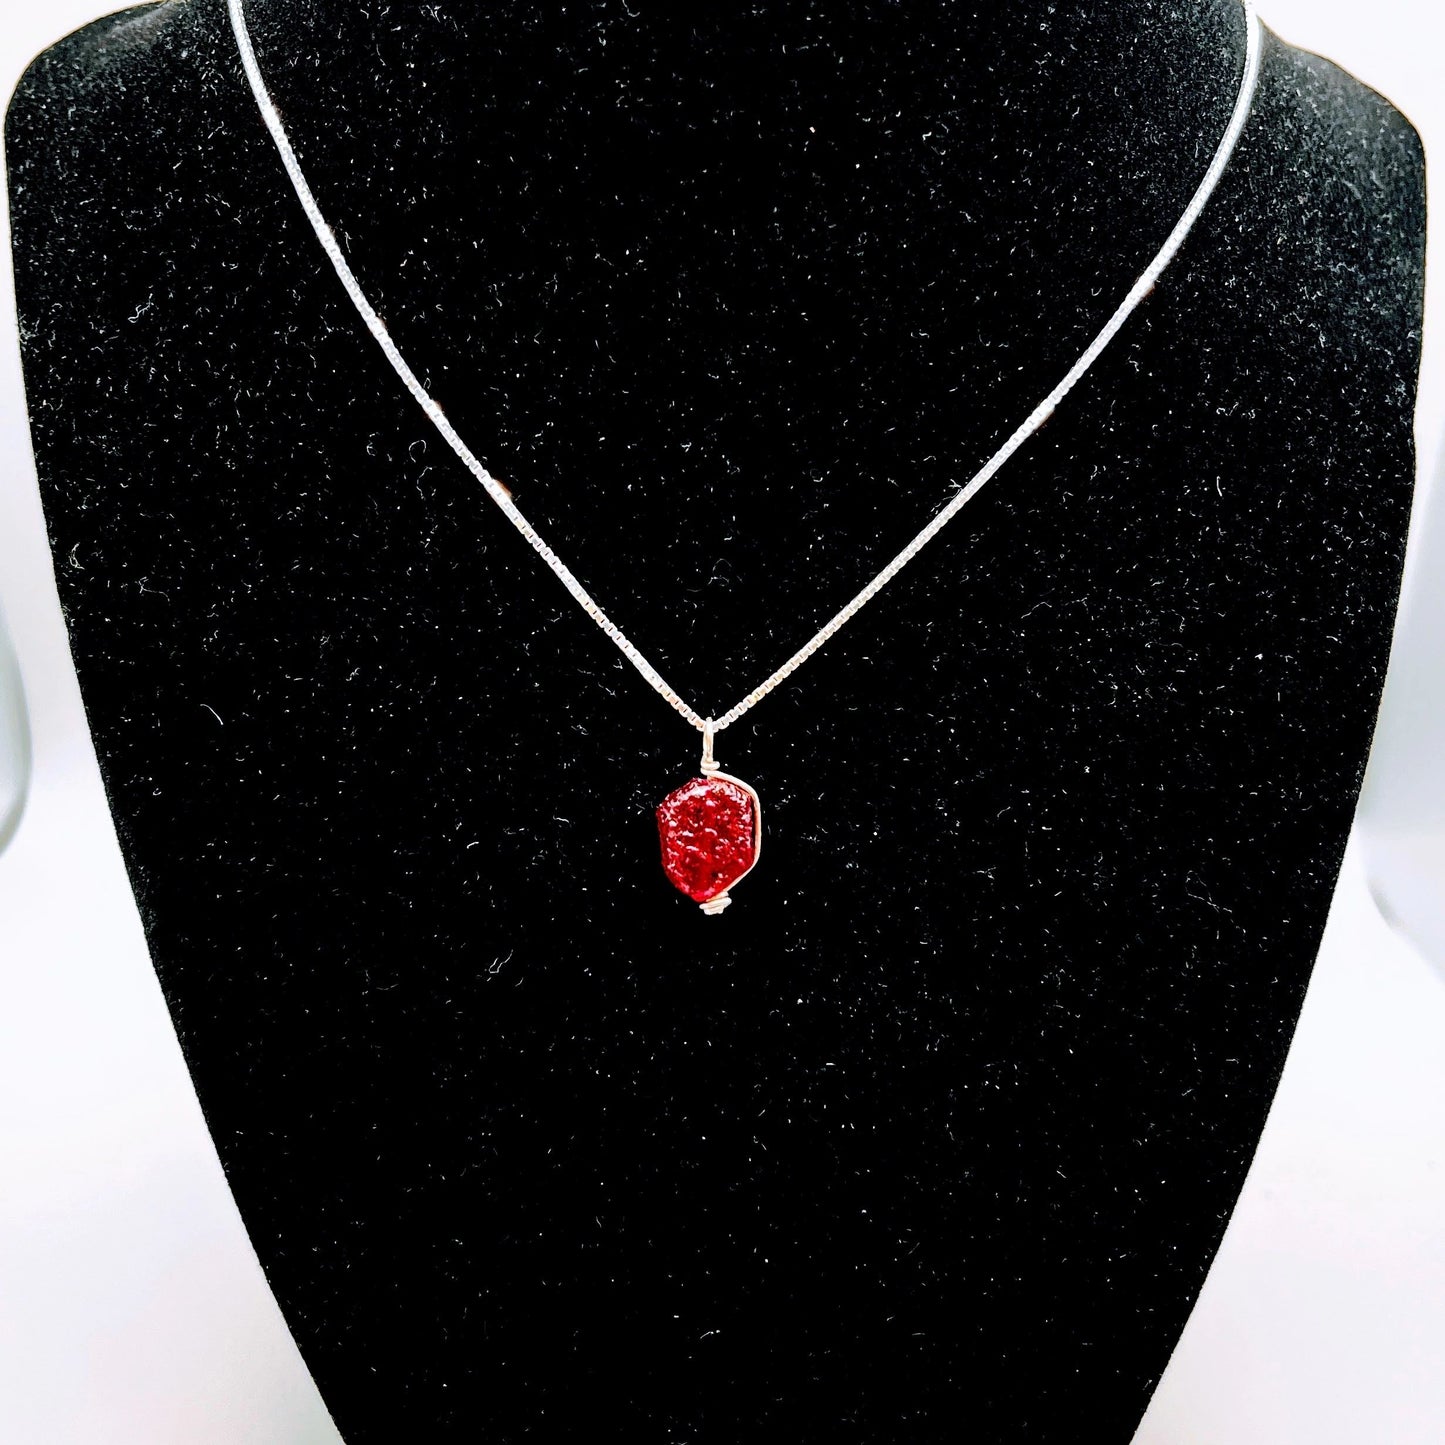 "Passion" | Raw Ruby Crystal Necklace | Wealth, Prosperity, Love, Passion